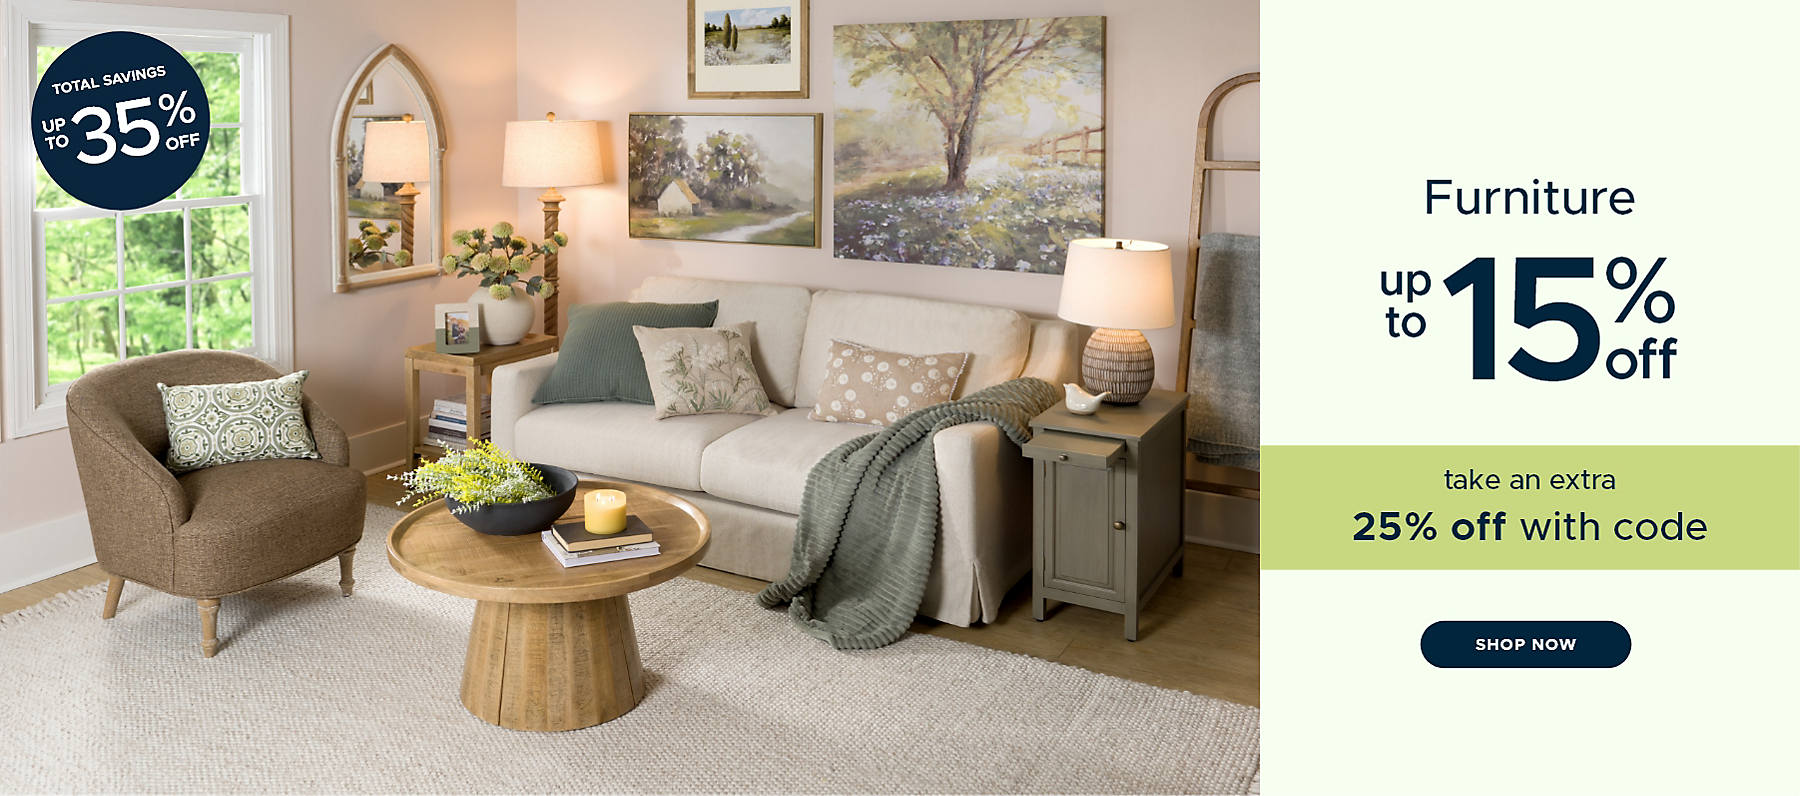 Furniture up to 15% off take an extra 25% off with code shop now total savings up to 35% off